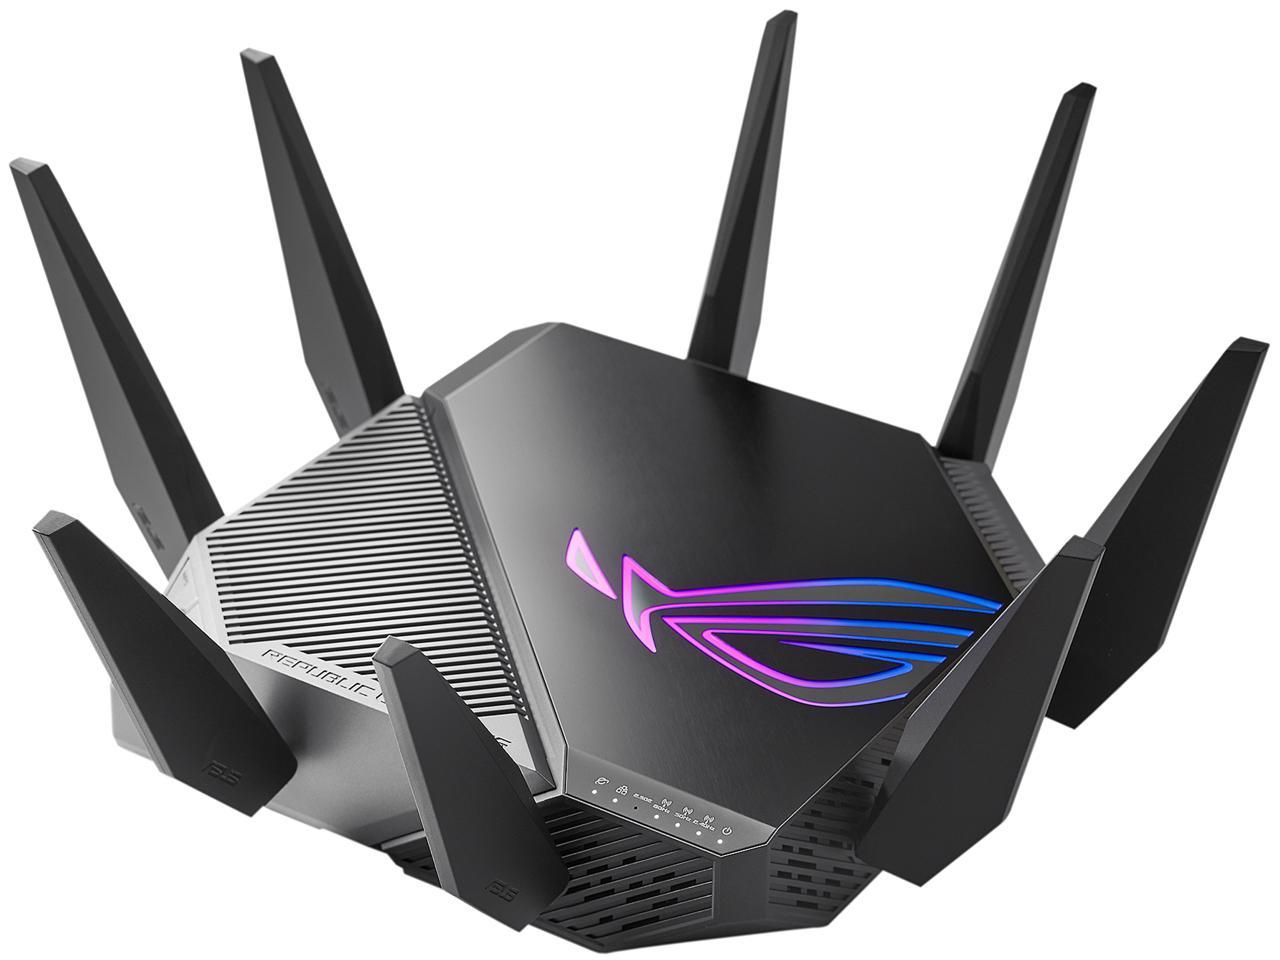 asus-wifi-6e-gaming-router-tri-band-wireless-router-newegg